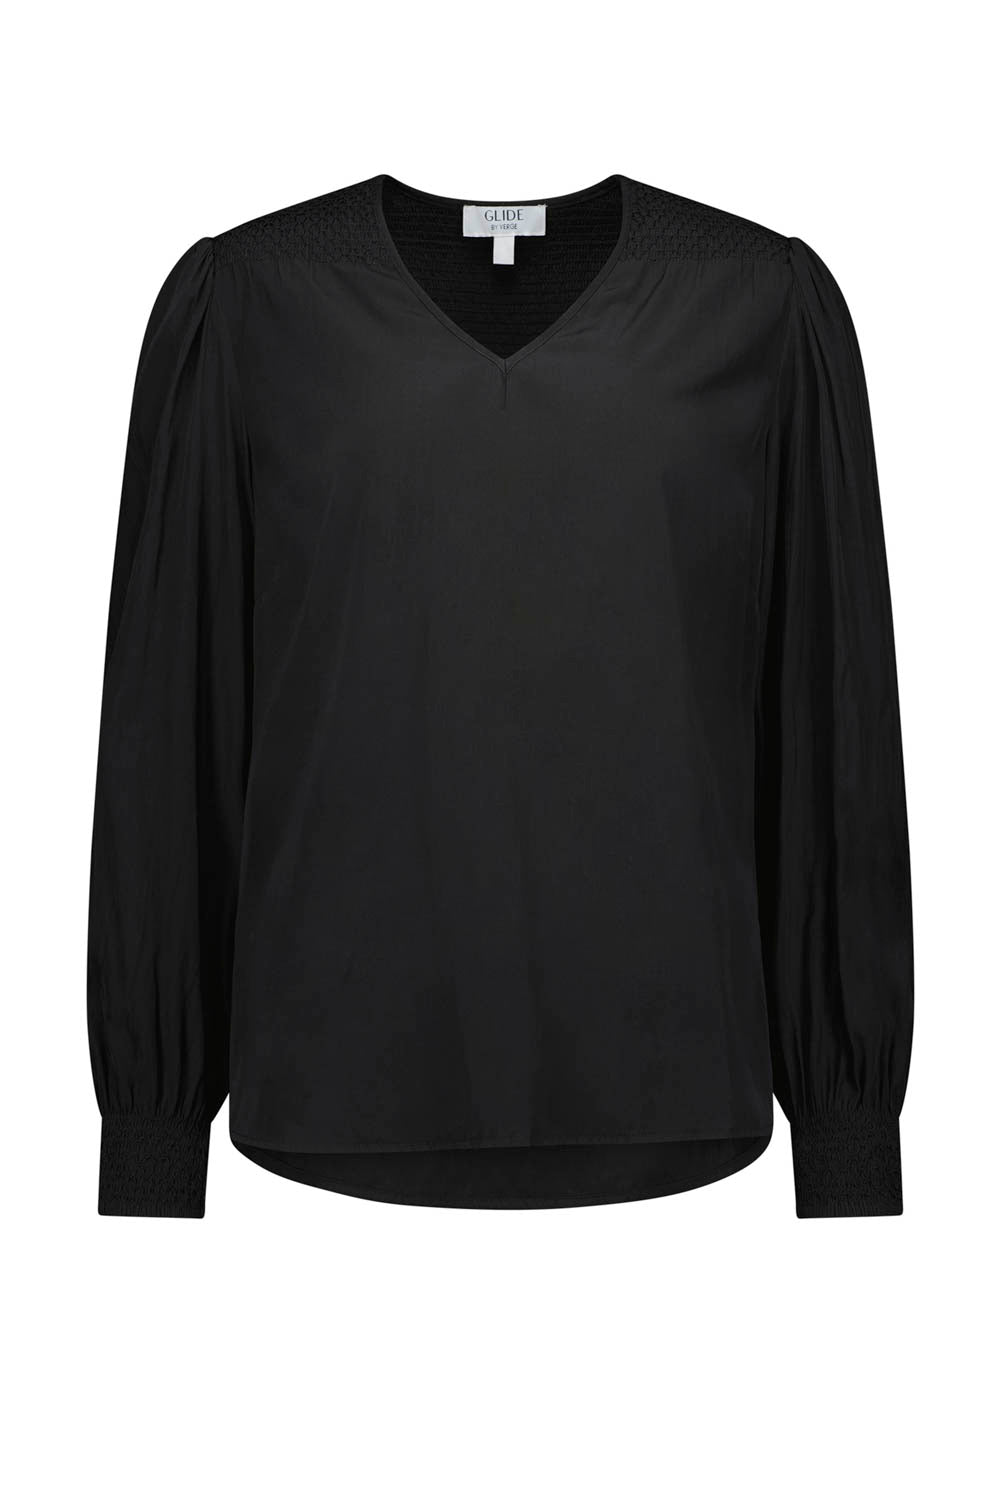 Glide by Verge - Tangled Blouse - Black - Blouse VERGE